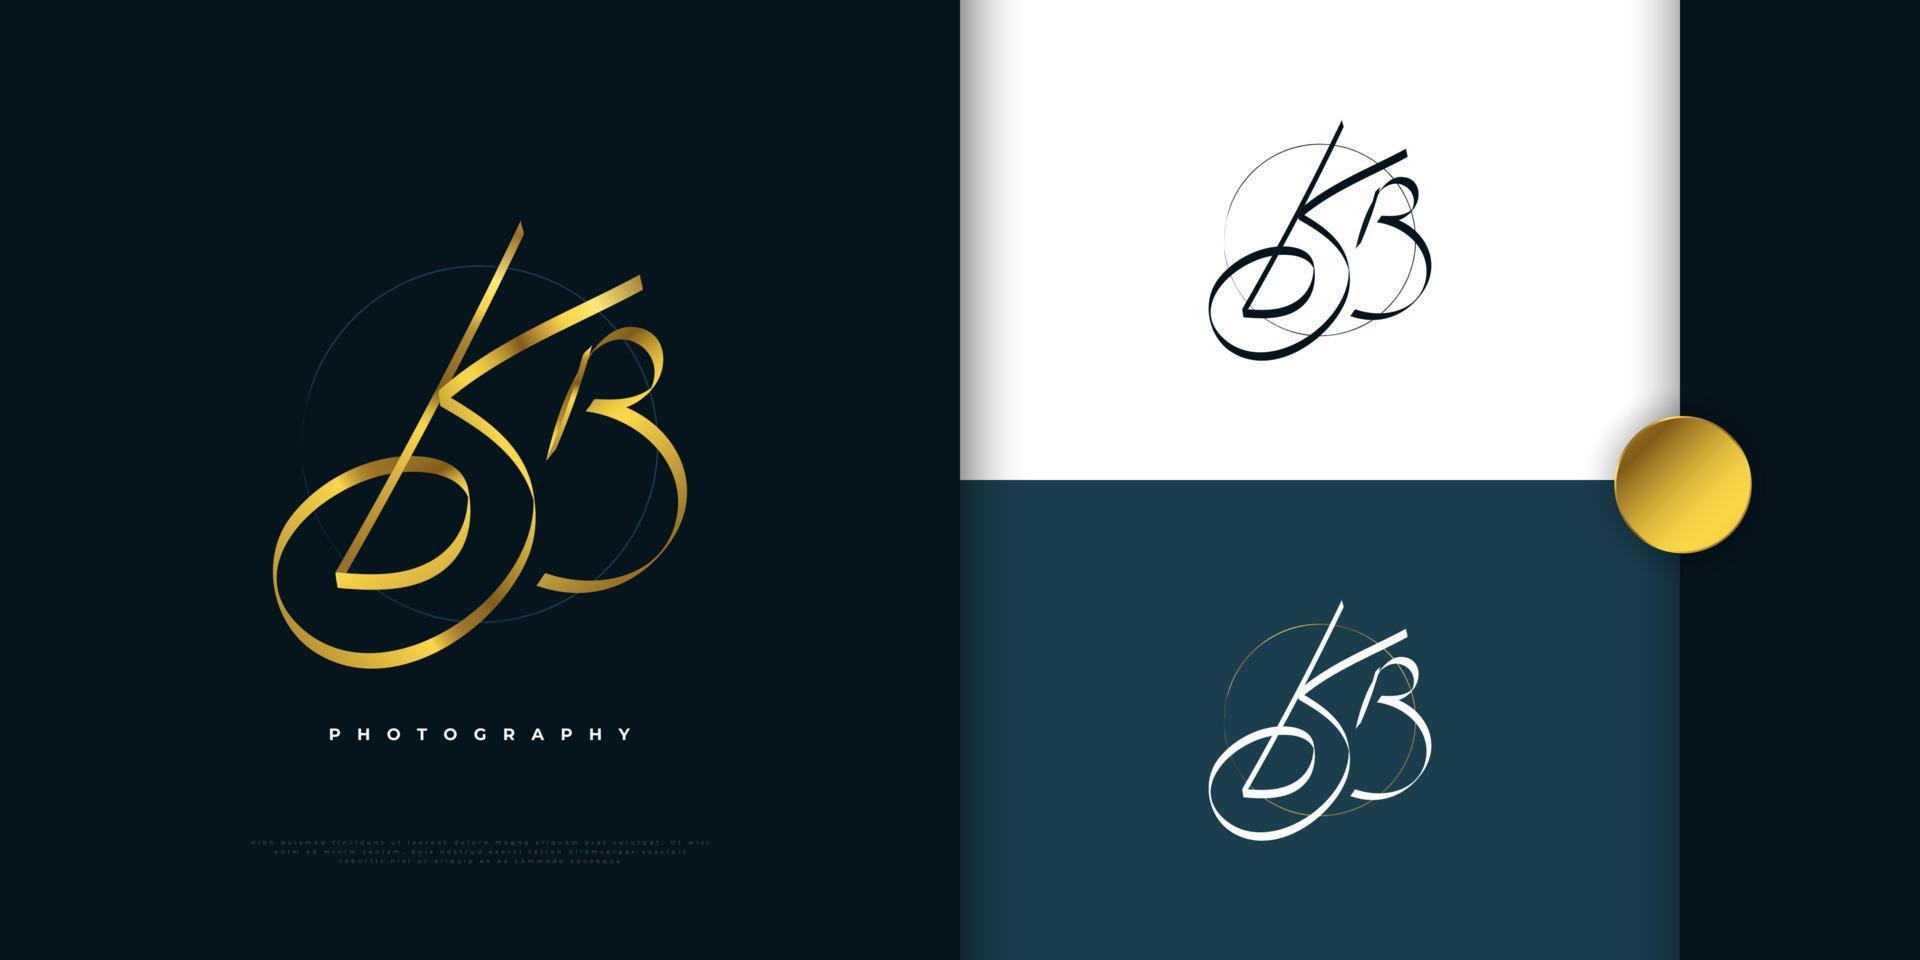 KB Initial Signature Logo Design with Elegant and Minimalist Gold Handwriting Style. Initial K and B Logo Design for Wedding, Fashion, Jewelry, Boutique and Business Brand Identity vector